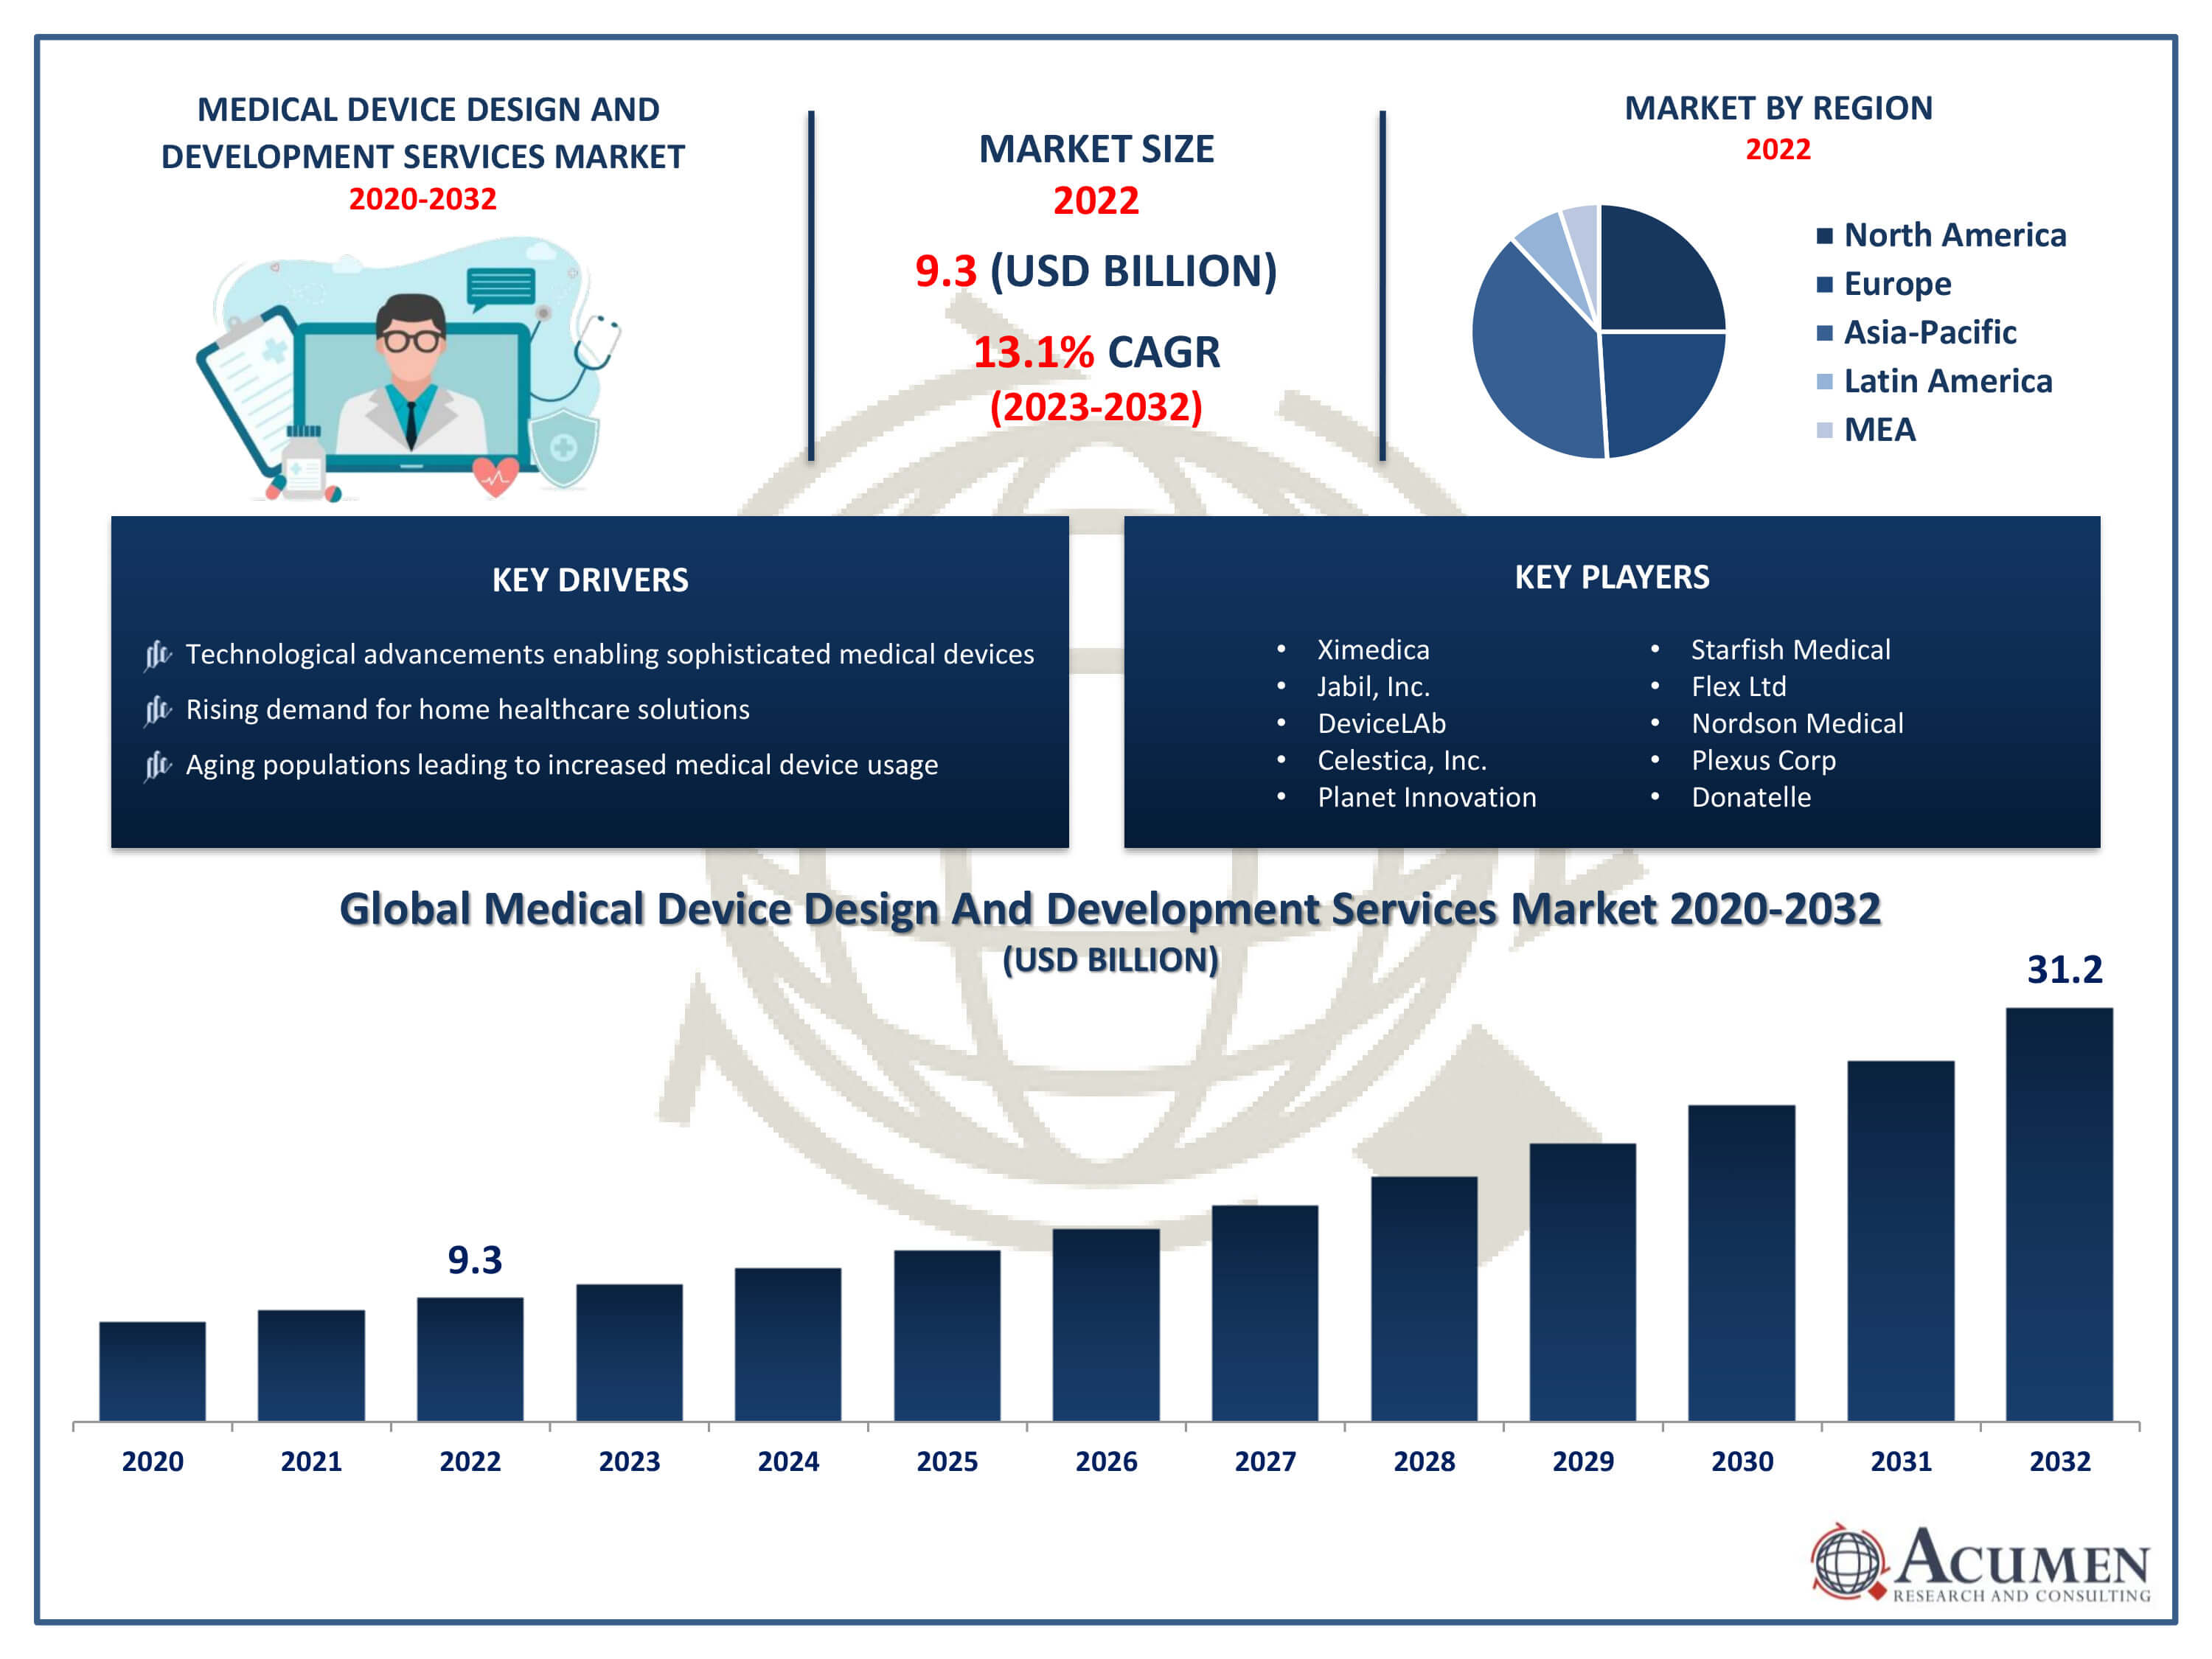 Medical Device Design and Development Services Market Trends